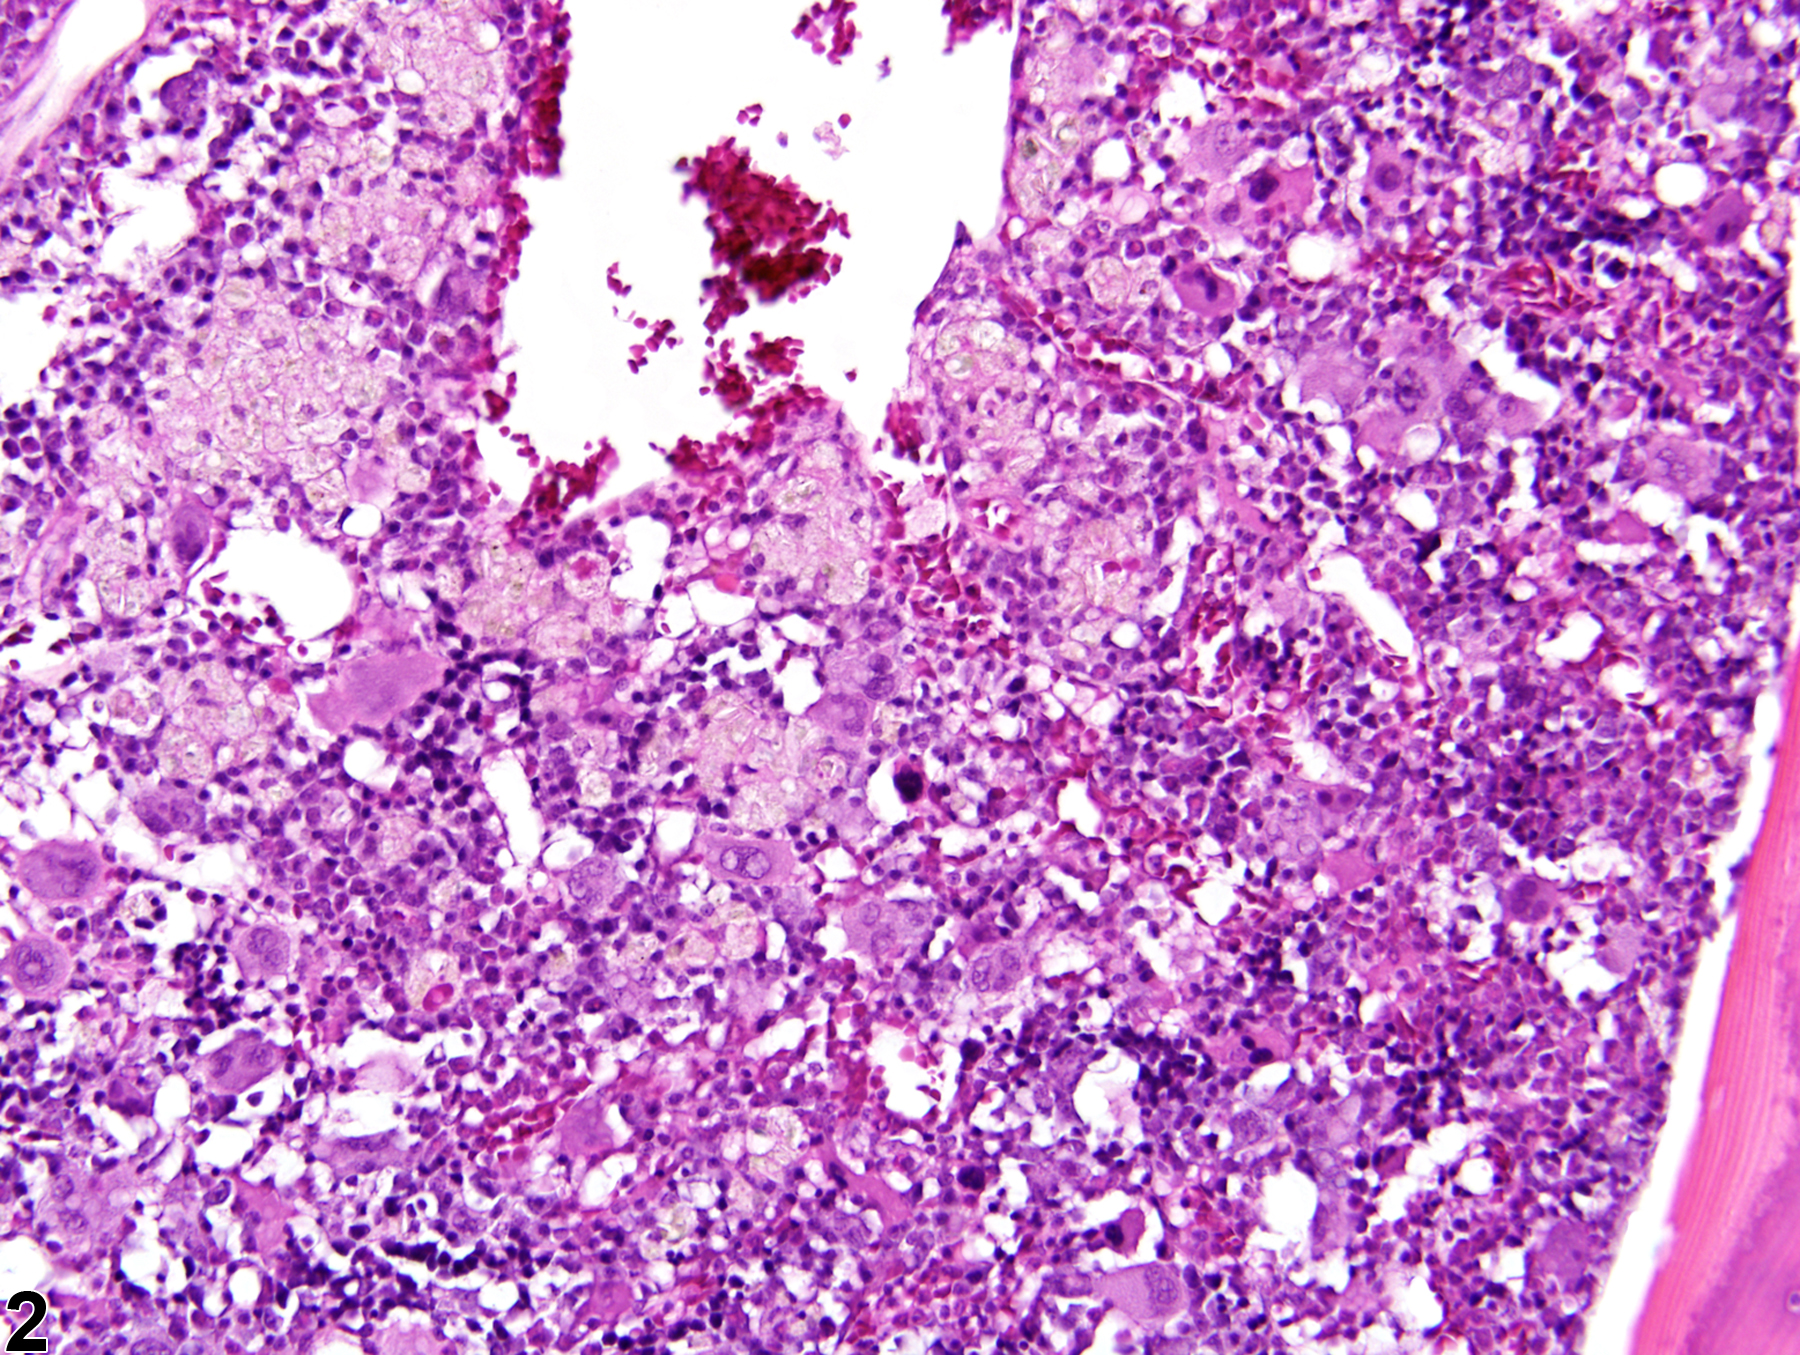 Image of infiltration cellular, histiocyte in the bone marrow from a female F344/N rat in a 2 year study